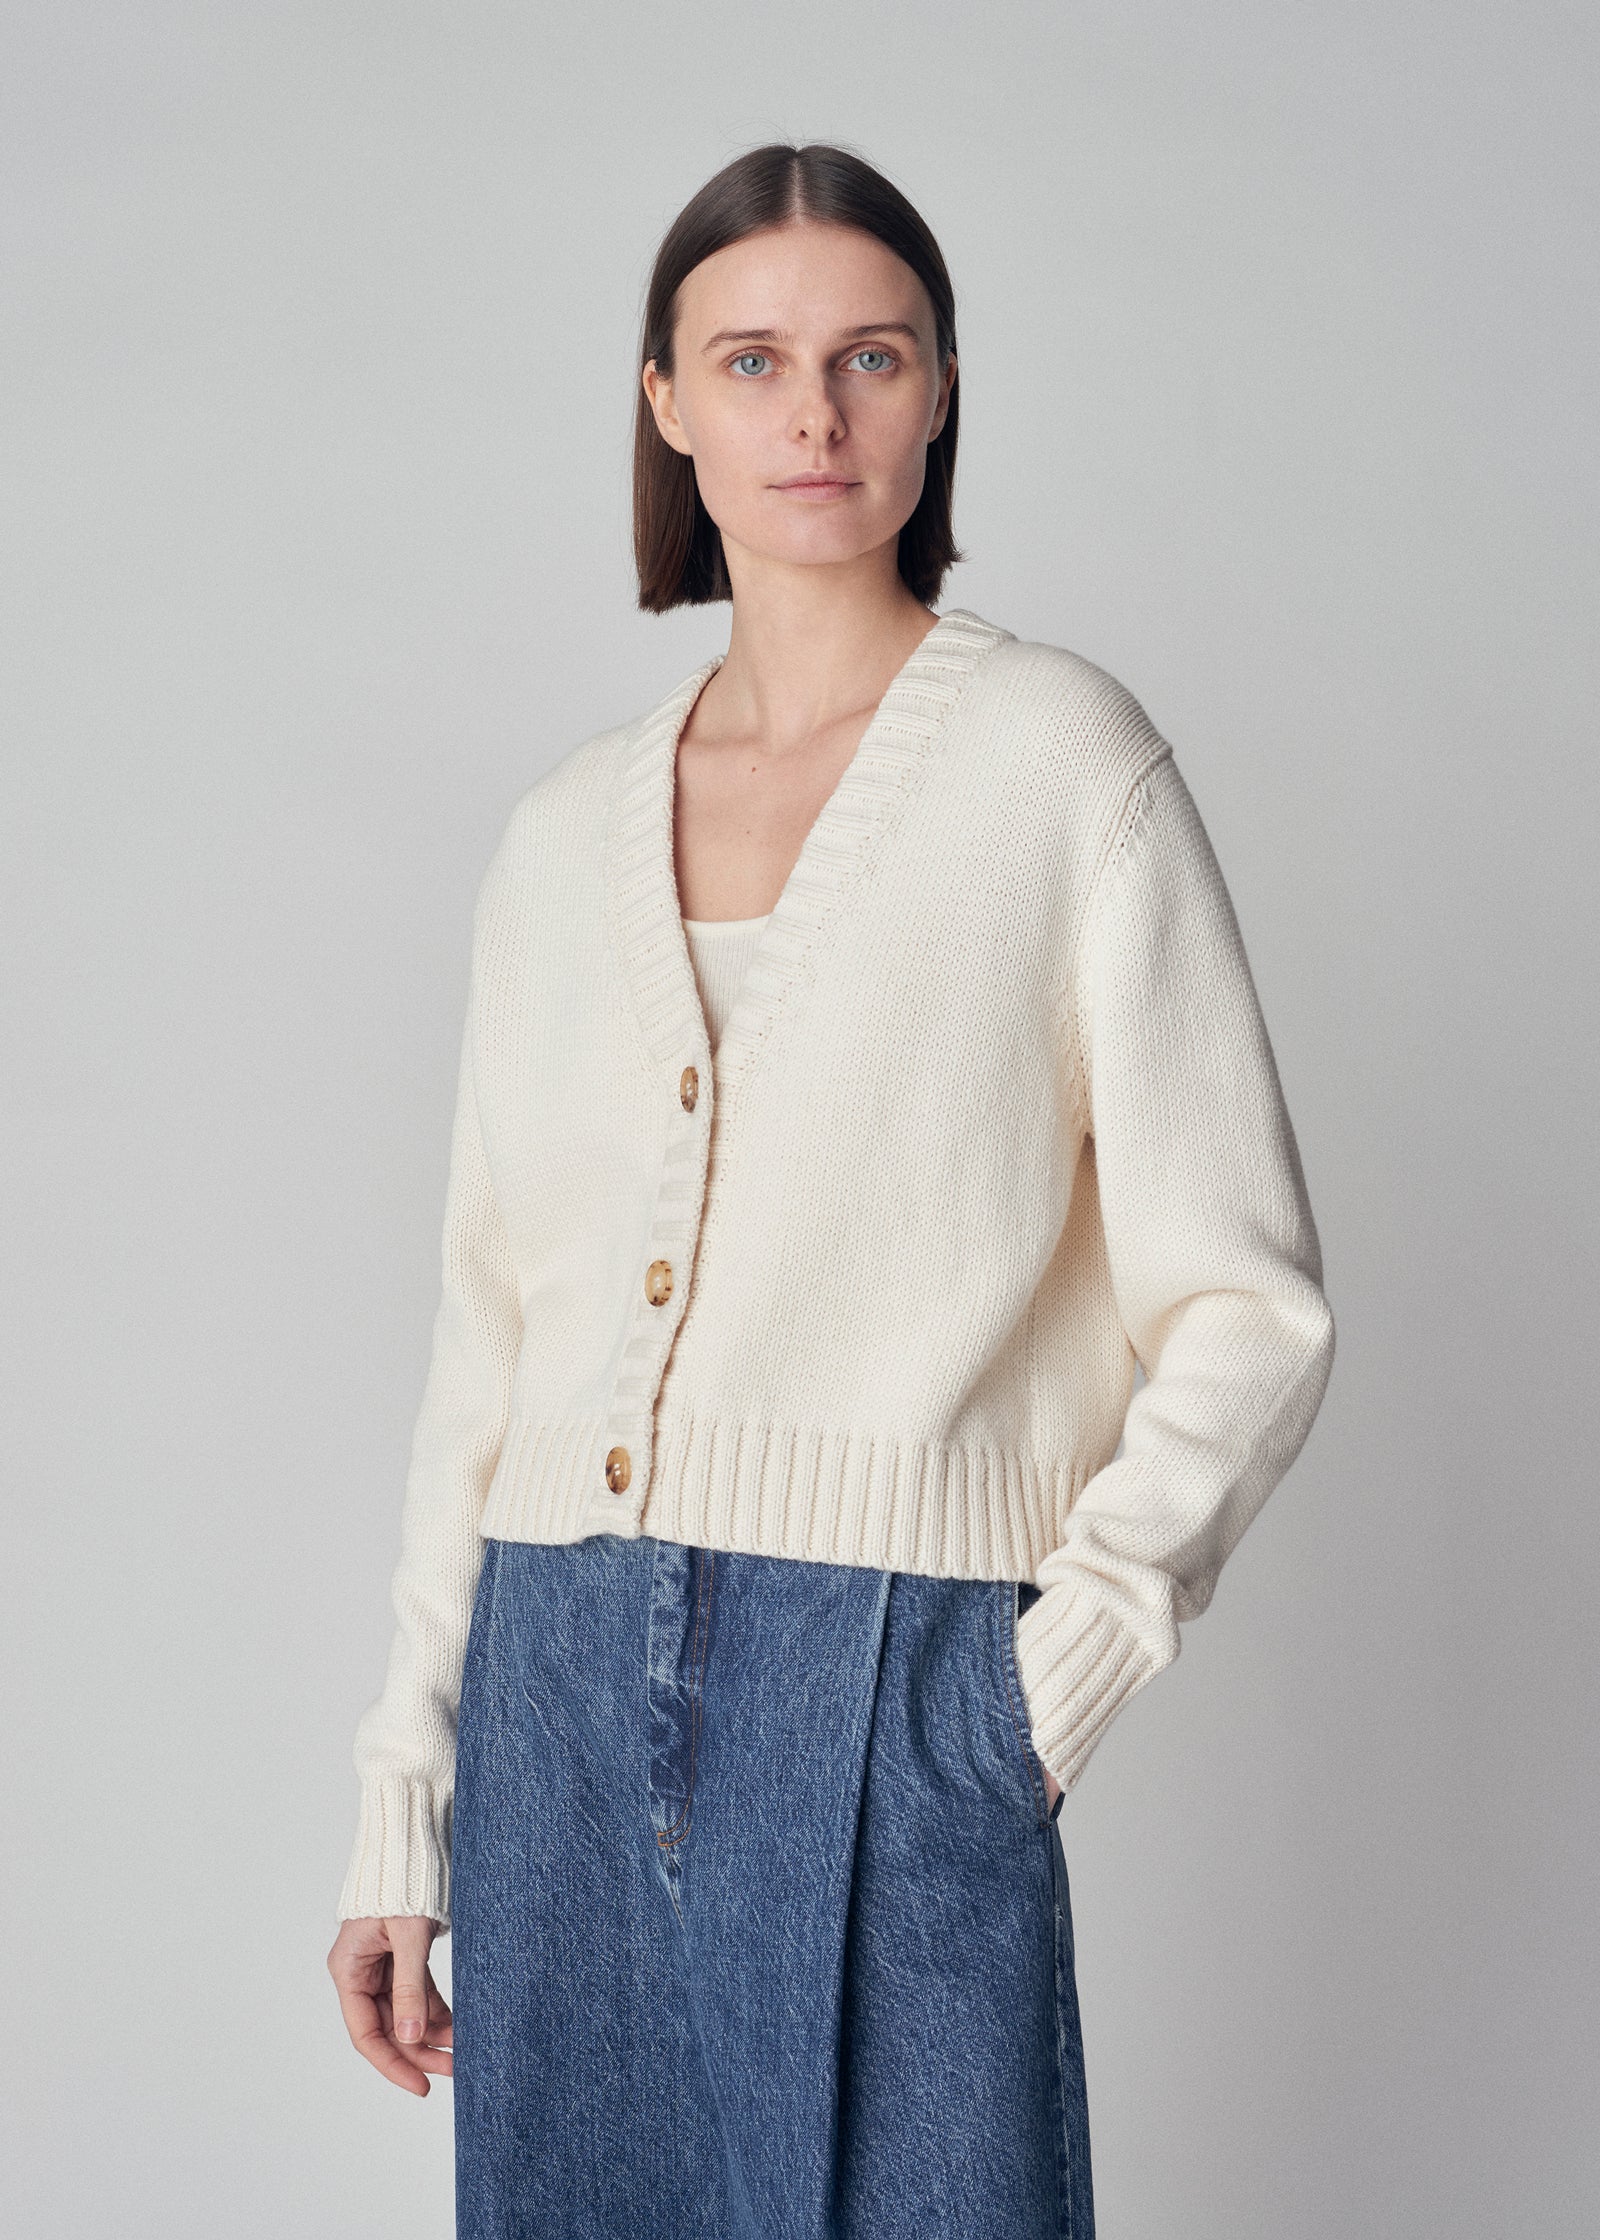 Cropped Cardigan in Chunky Cotton Knit  - Ivory - CO Collections